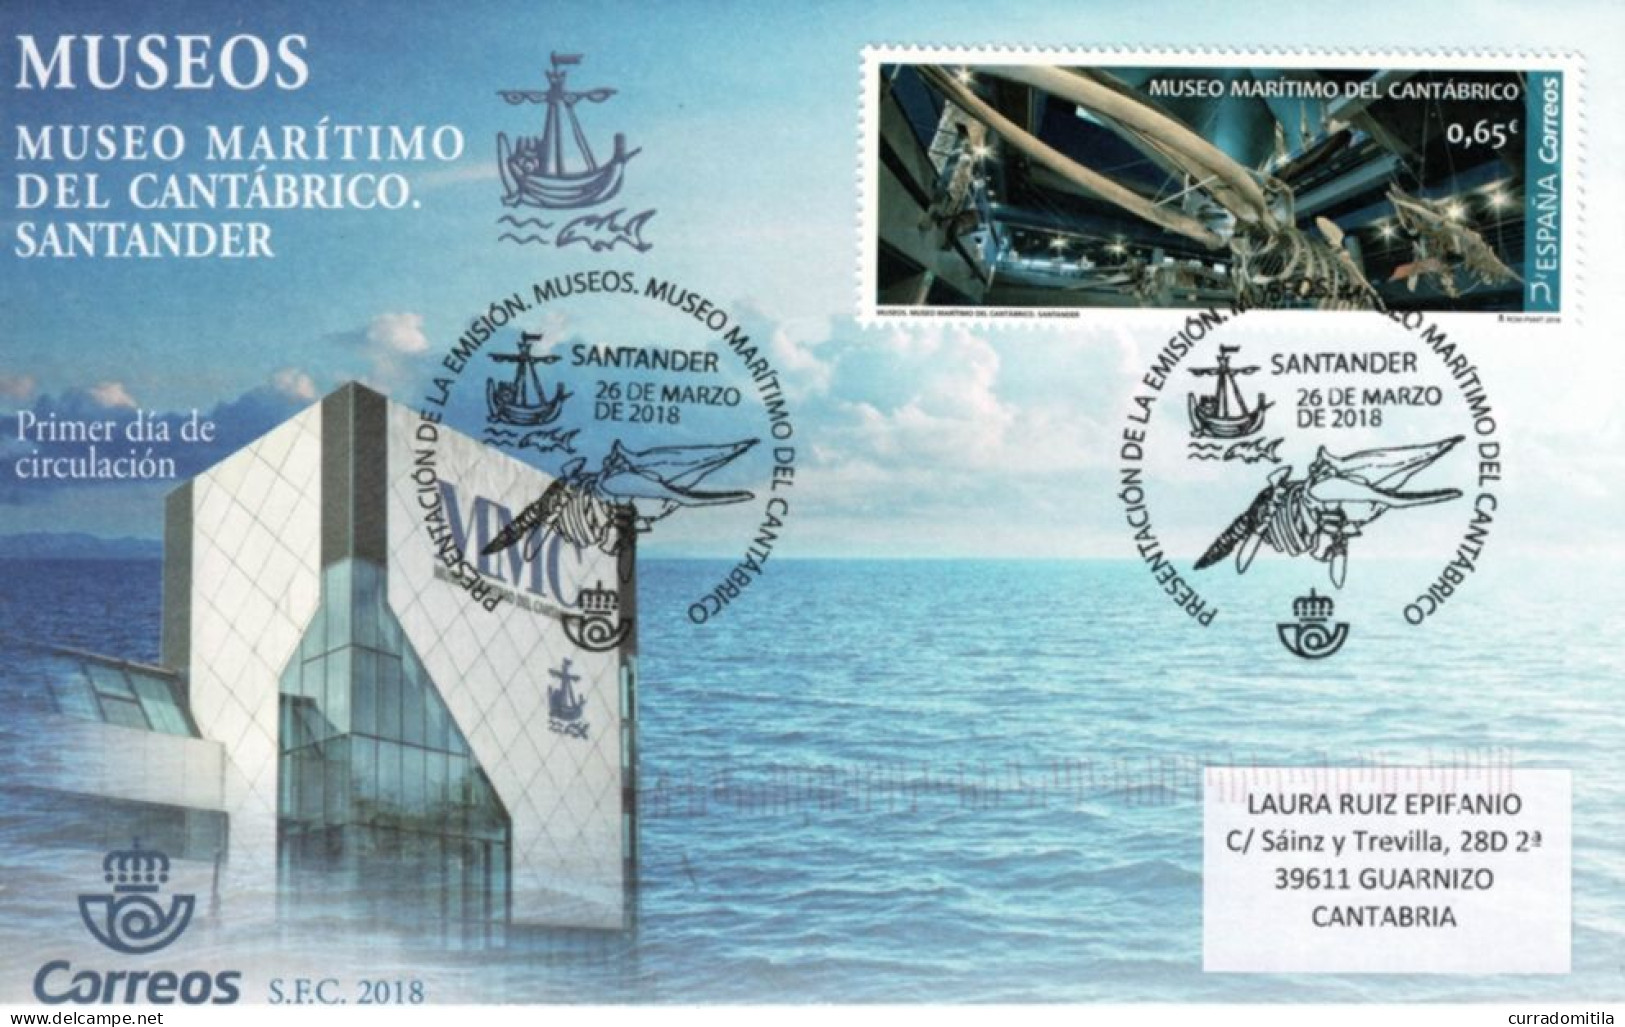 SPAIN. Circulated FDC From Santander With Maritime Museum Of Santander. Skeleton Of A Whale. Presentation Cachet - Baleines